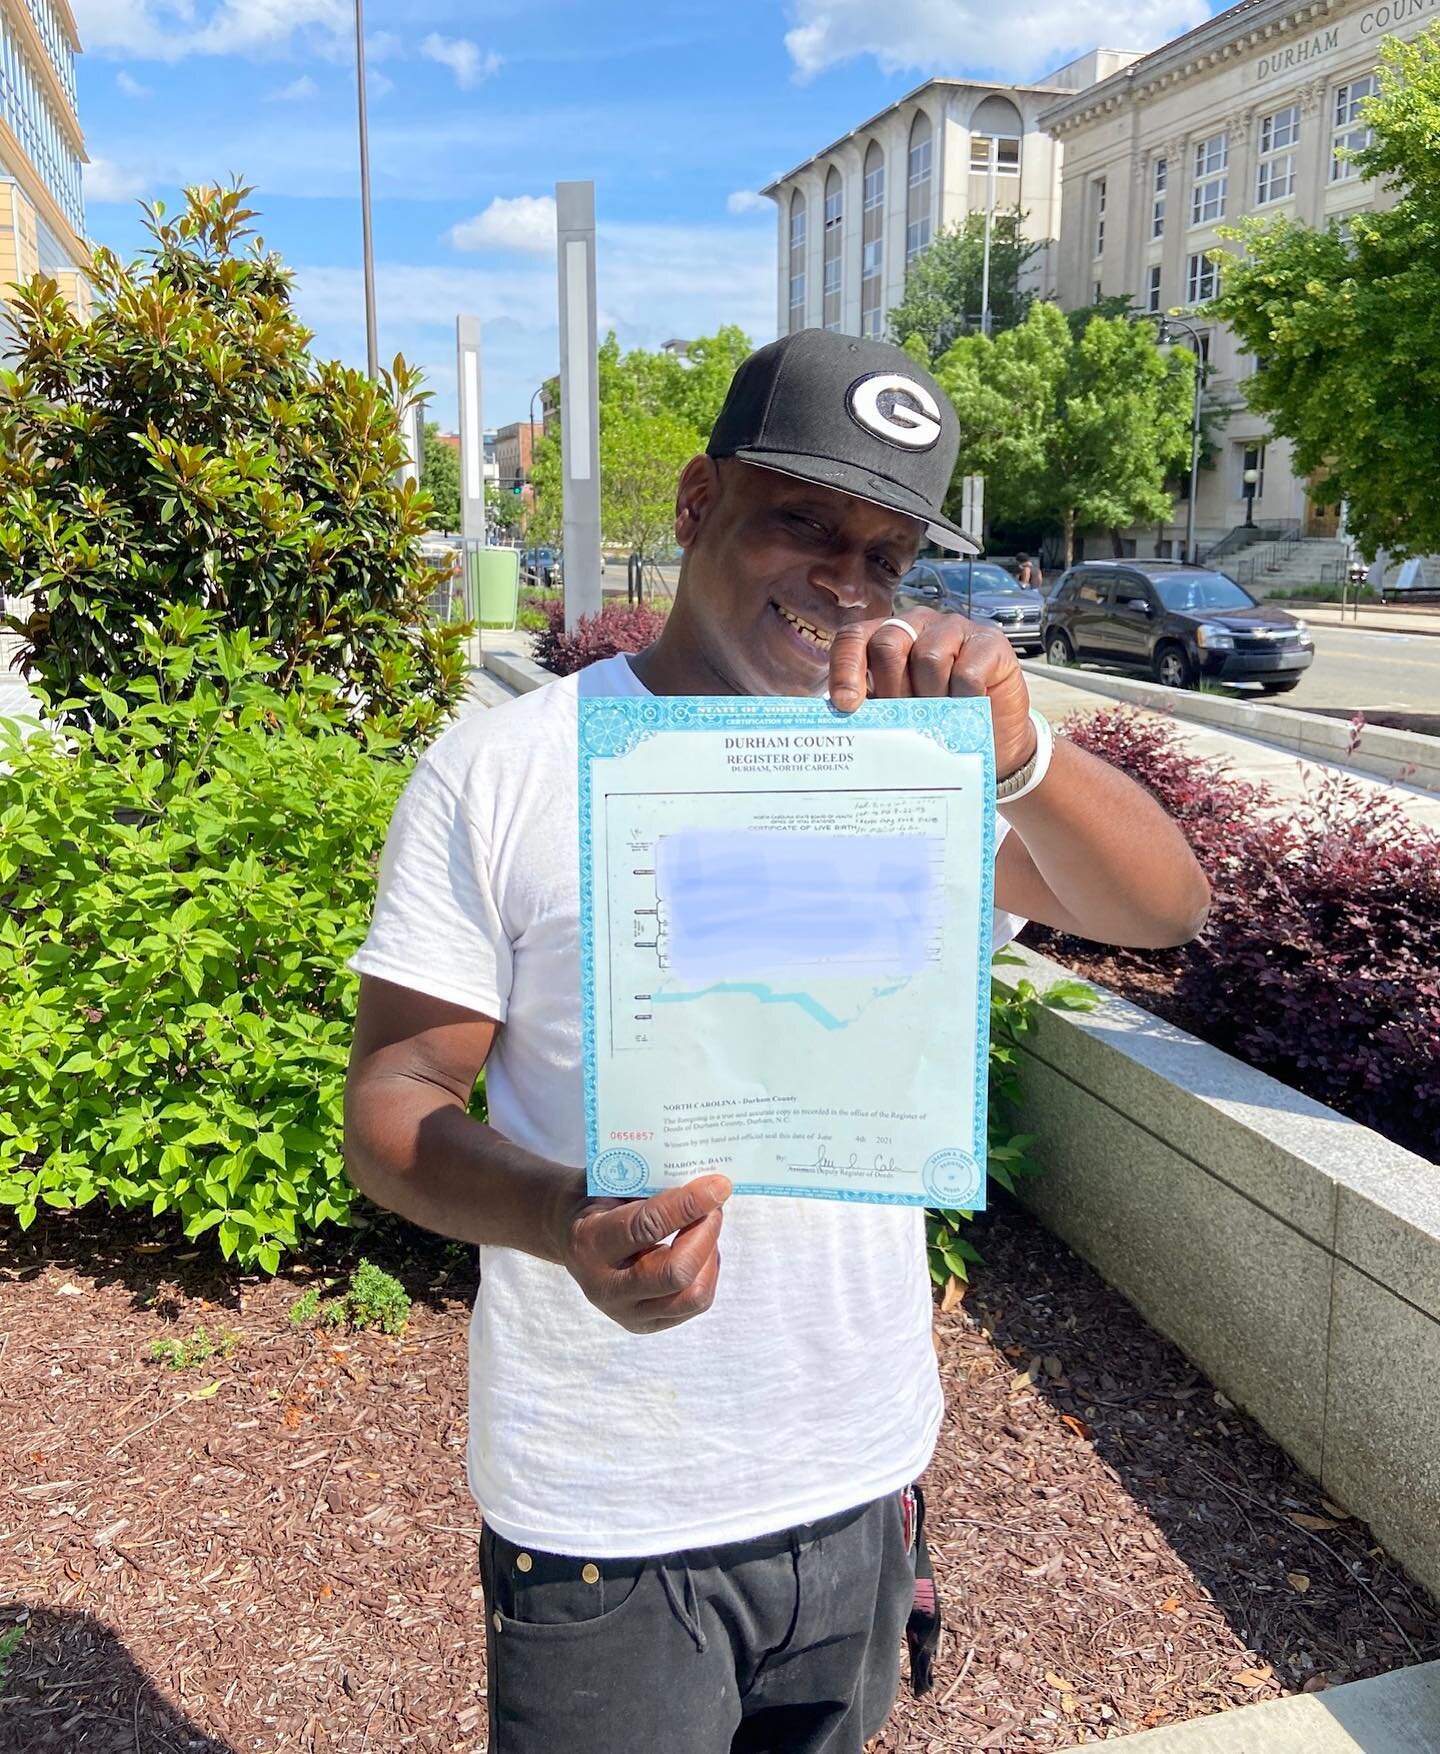 This is Paul. He&rsquo;s smiling because he just got his birth certificate, one of the last hurdles to gaining stable housing and a job. Congratulations Paul!